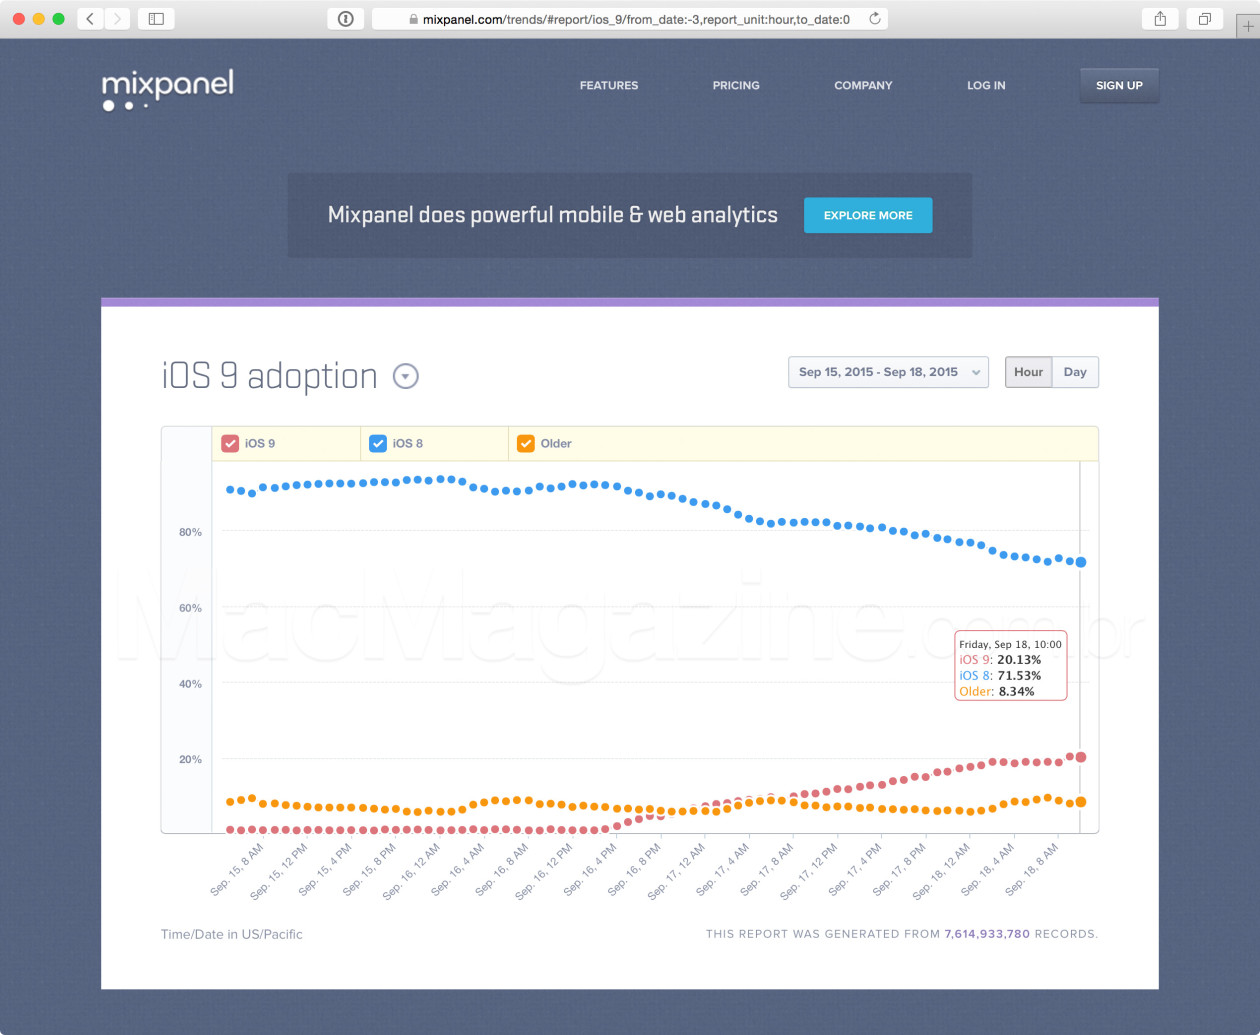 In less than 48 hours, iOS 9 adoption already exceeds 20%